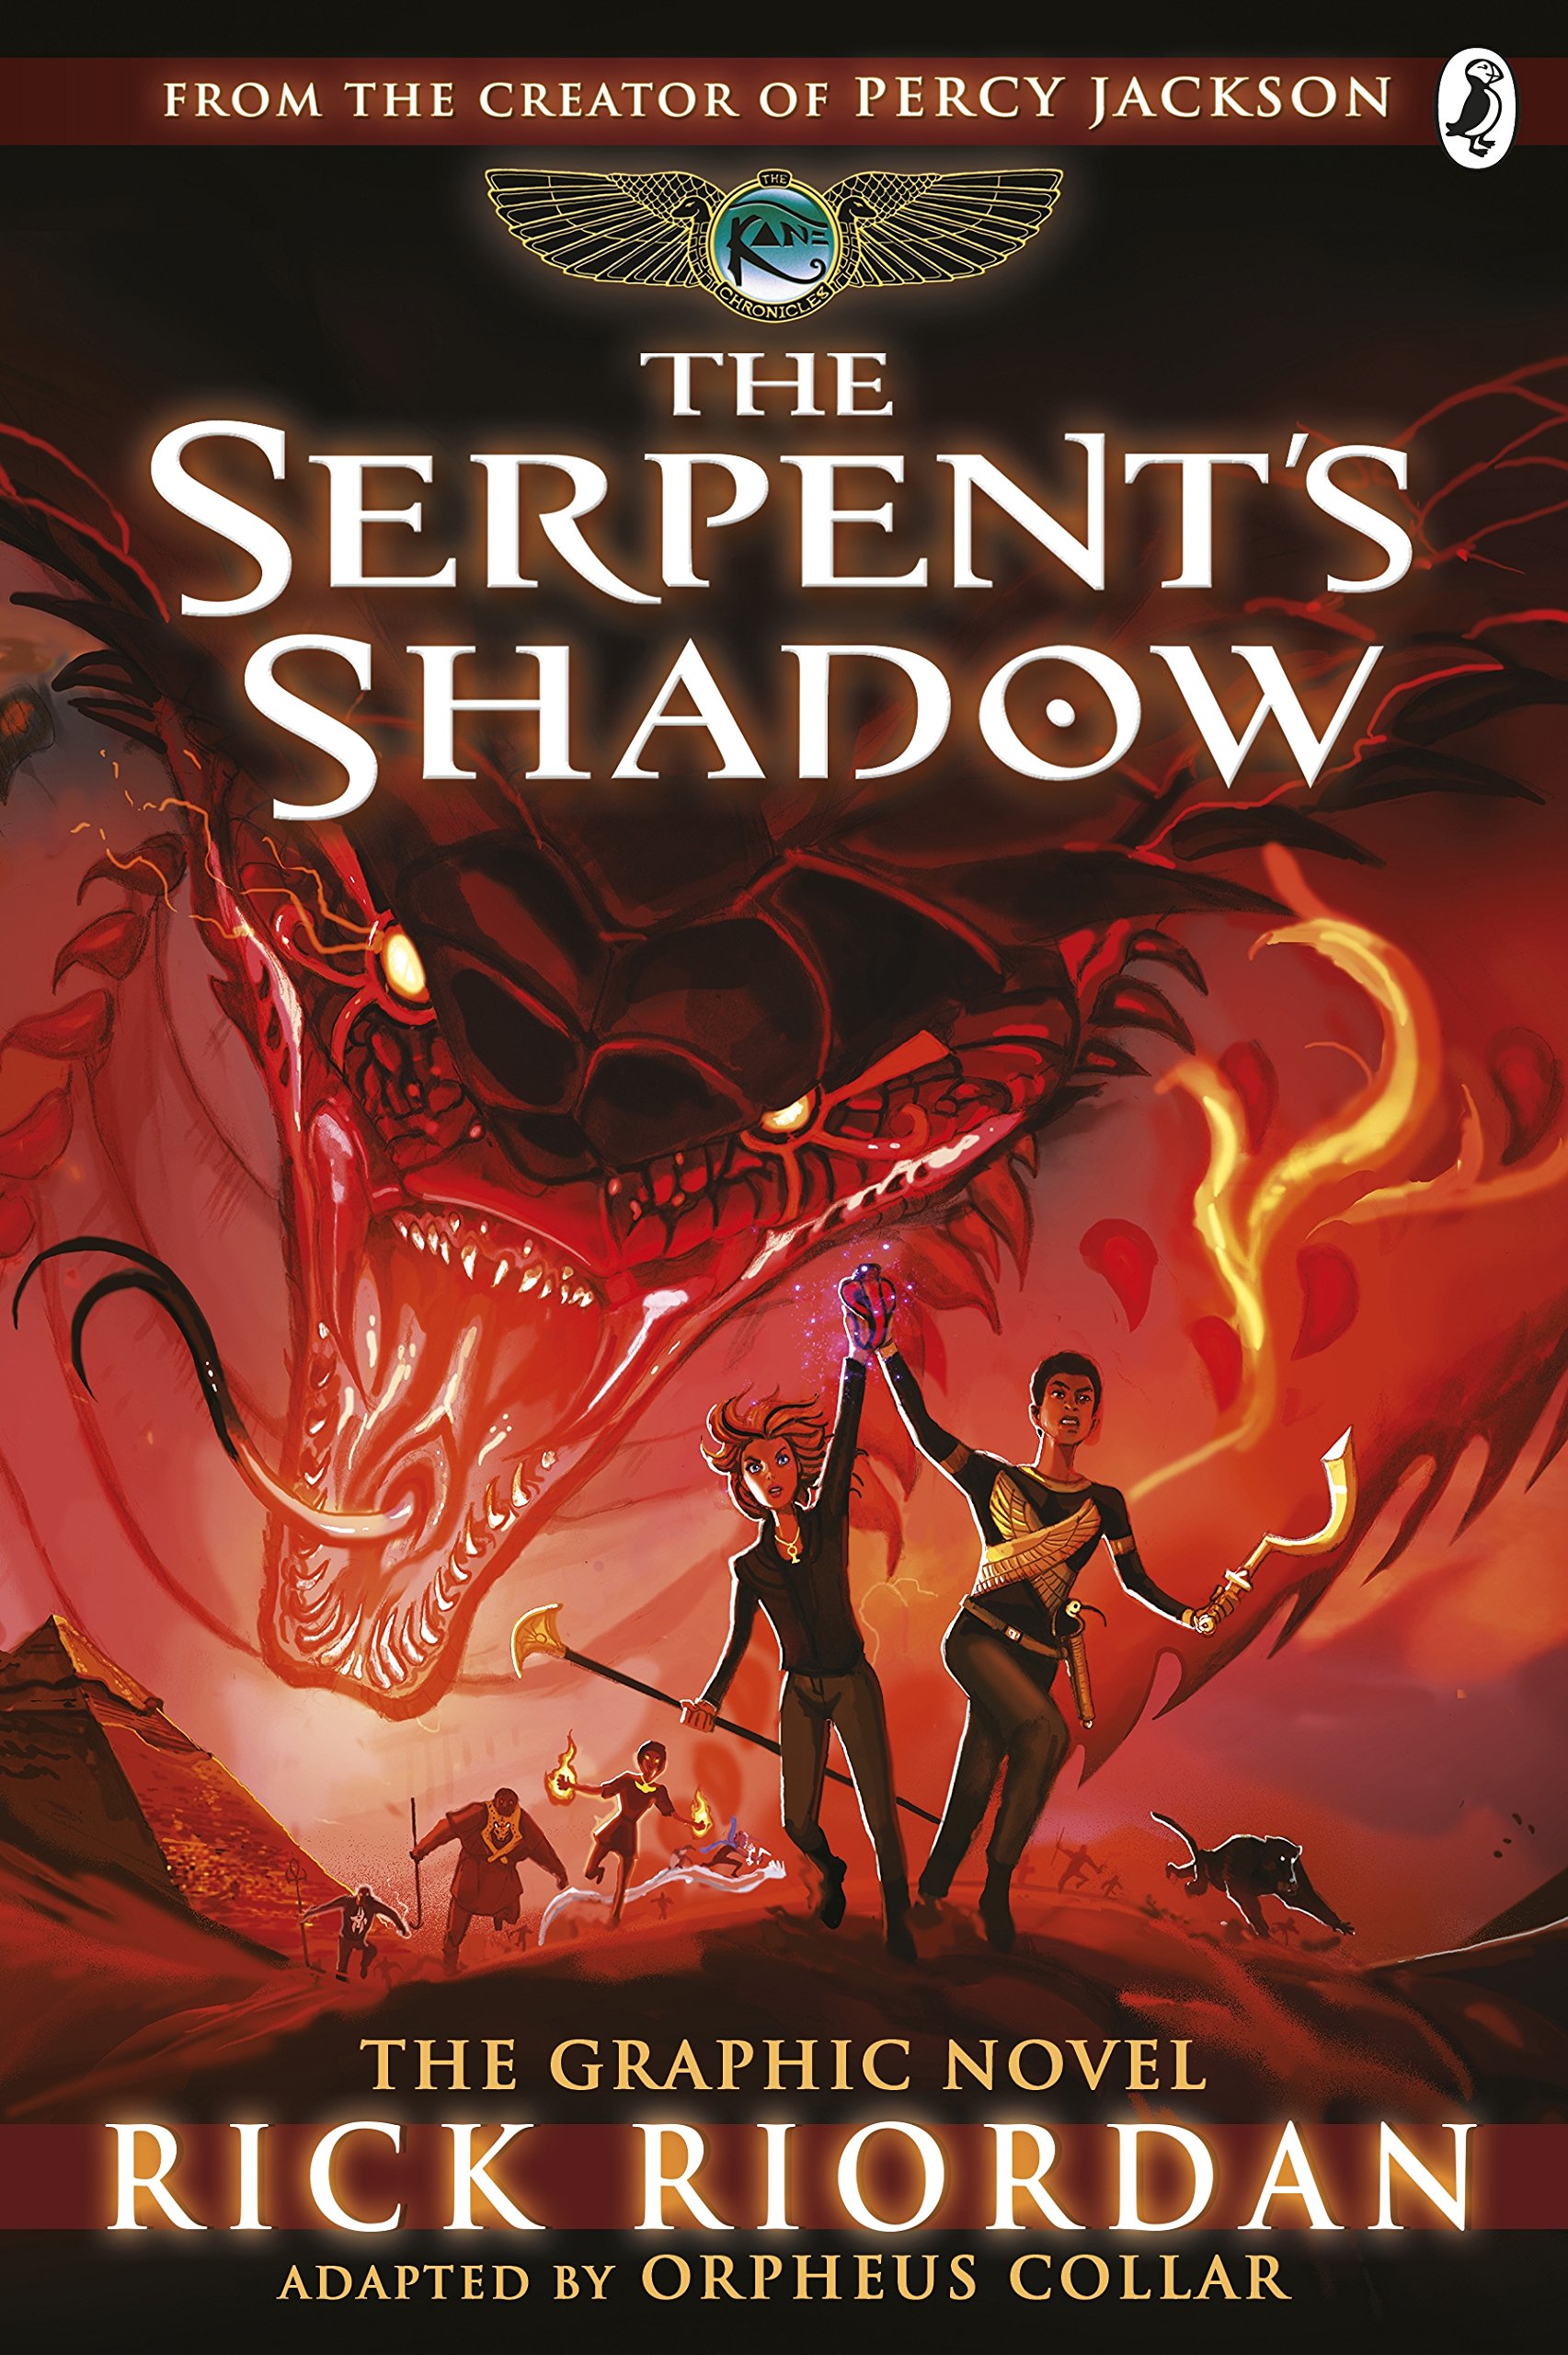 The Kane Chronicles : The Serpents Shadow #03 (The Graphic Novel)